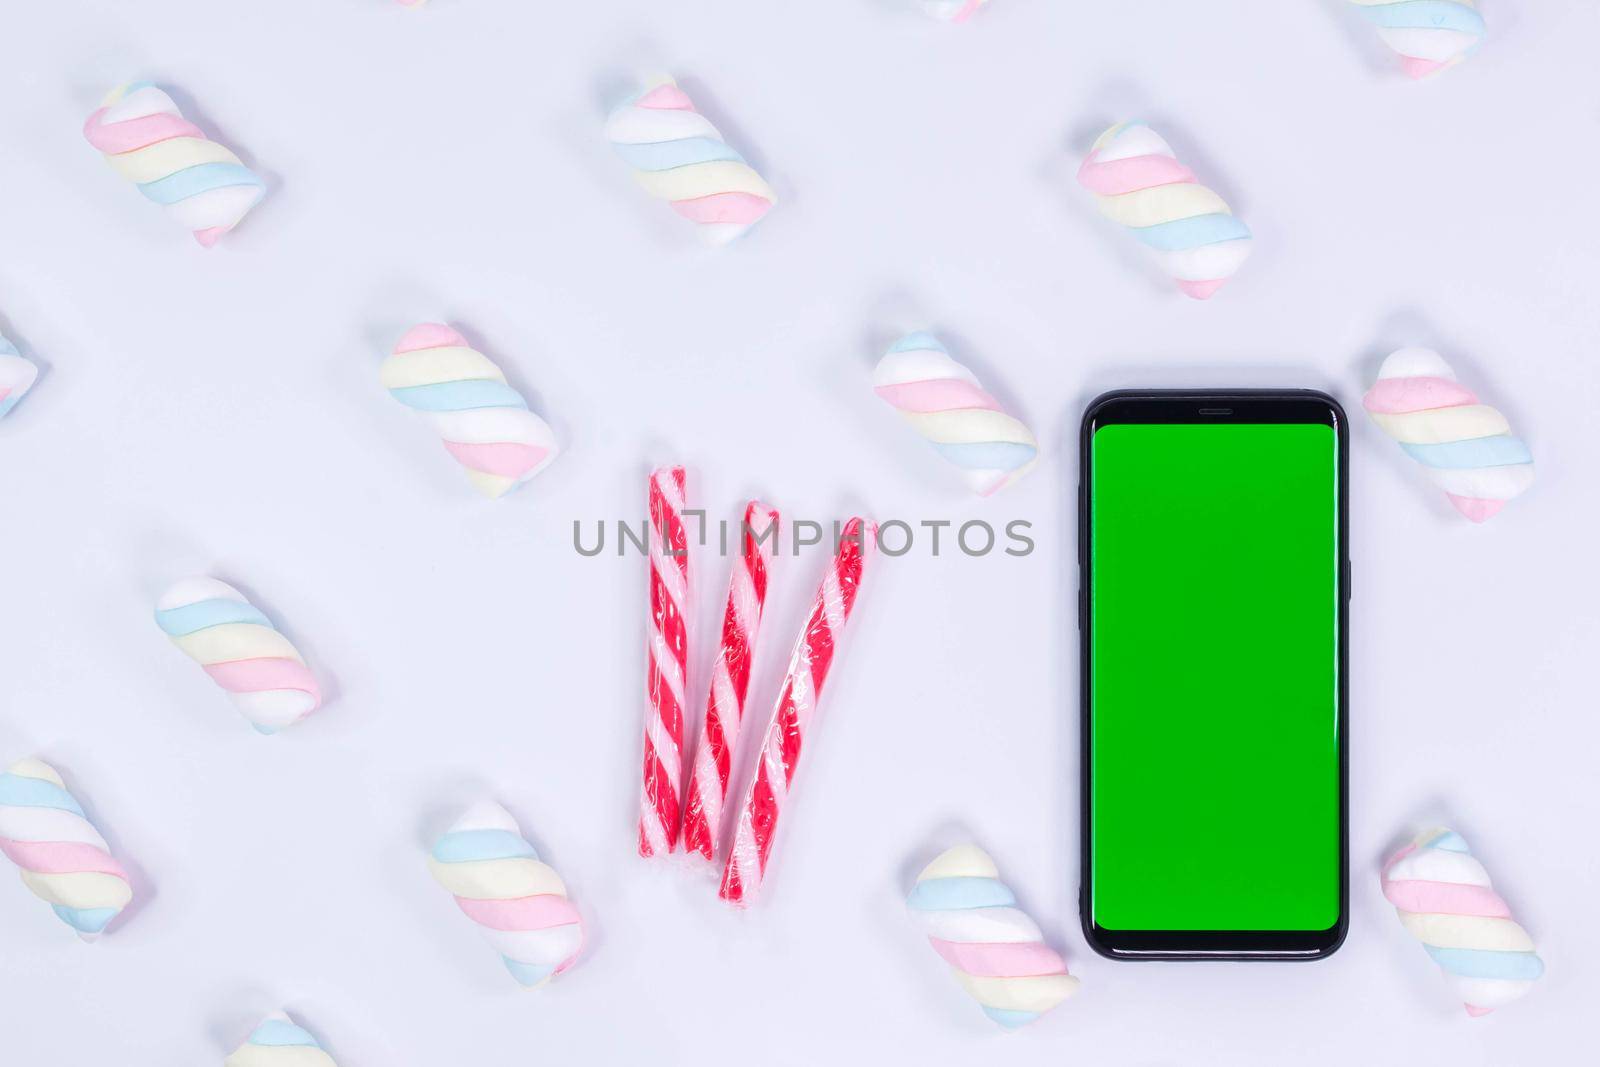 Phone mobile telephone with a vertical green screen. Candy cane Christmas candies. White background with twisted marshmallow pattern. Chroma key smartphone technology. Phone mockup. by JuliaDorian